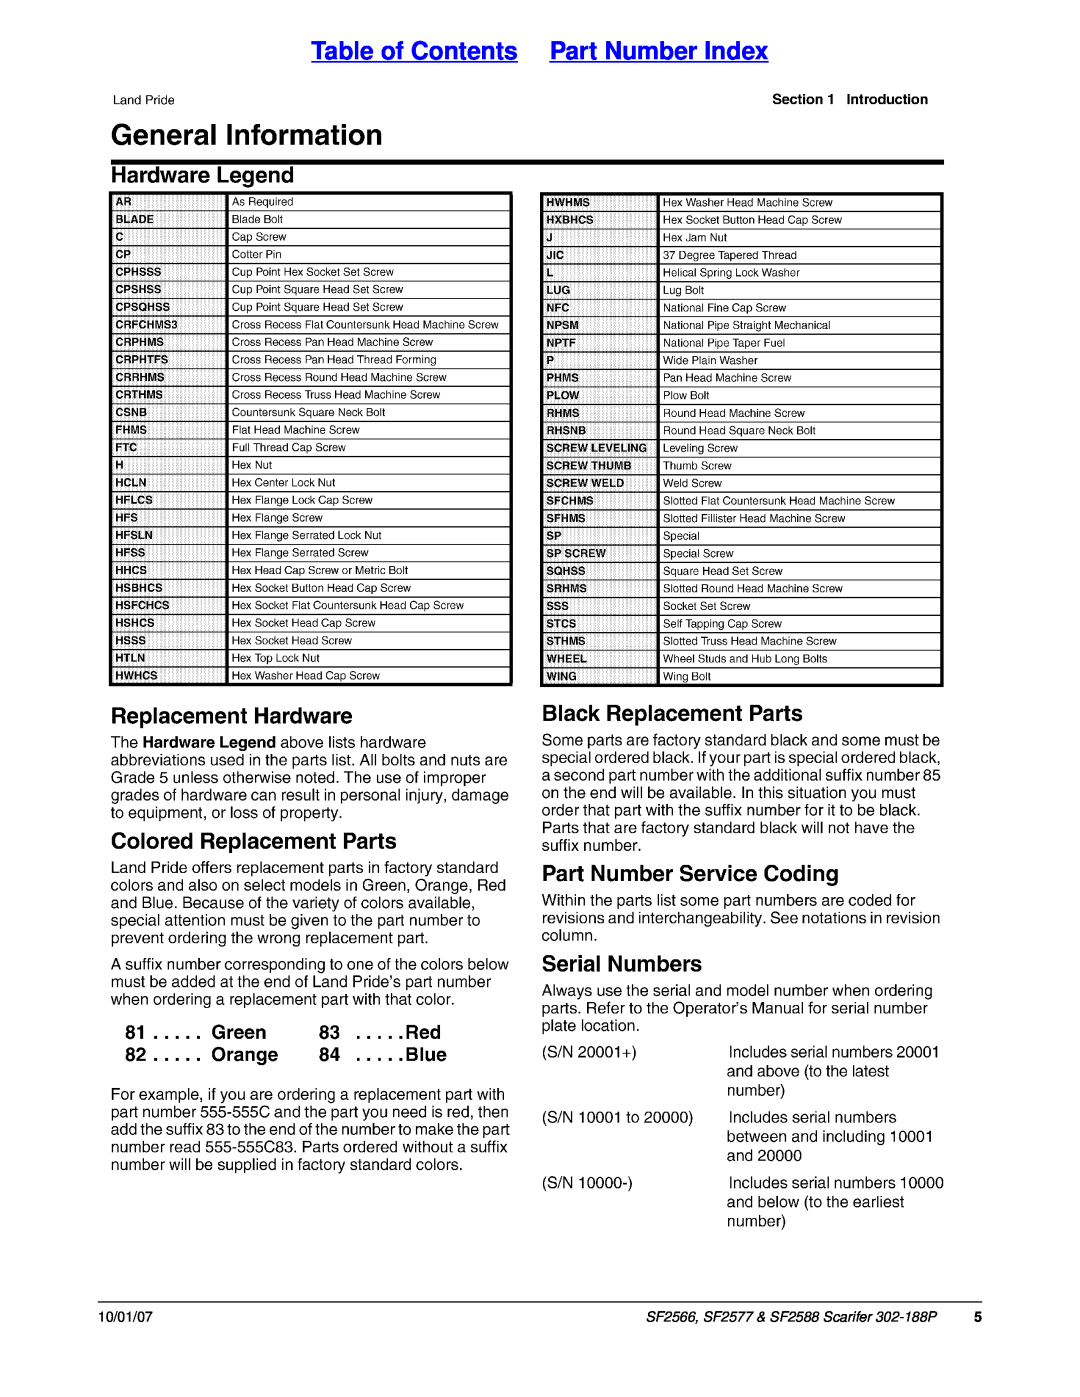 Land Pride manual Table of Contents Part Number Index, SF2566, SF2577 & SF2588 Scarifer 302-188P, 10/01/07 